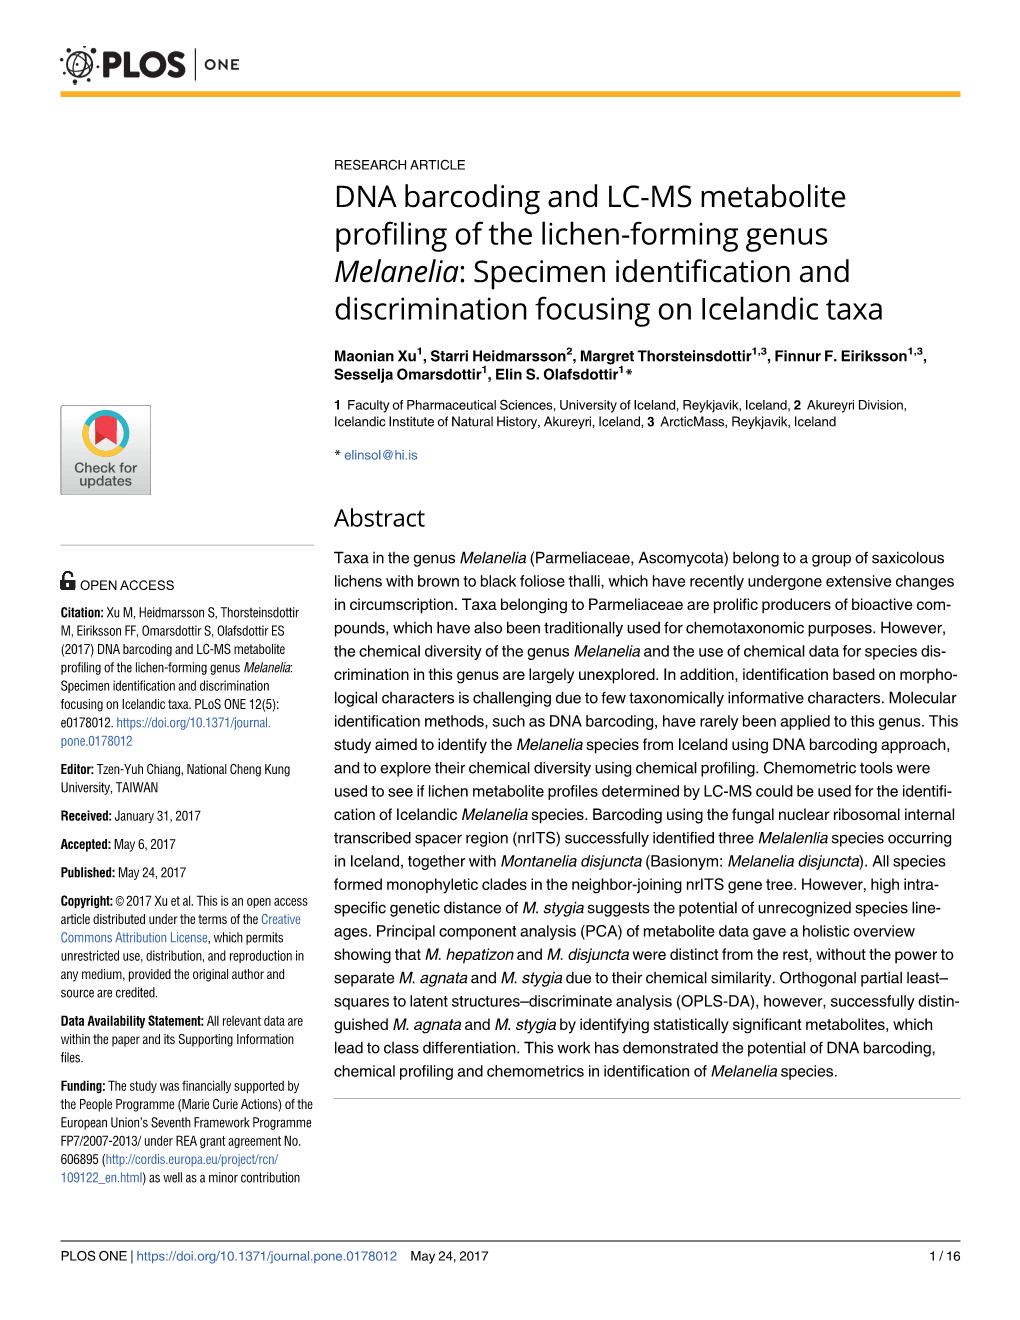 DNA Barcoding and LC-MS Metabolite Profiling of the Lichen-Forming Genus Melanelia: Specimen Identification and Discrimination Focusing on Icelandic Taxa